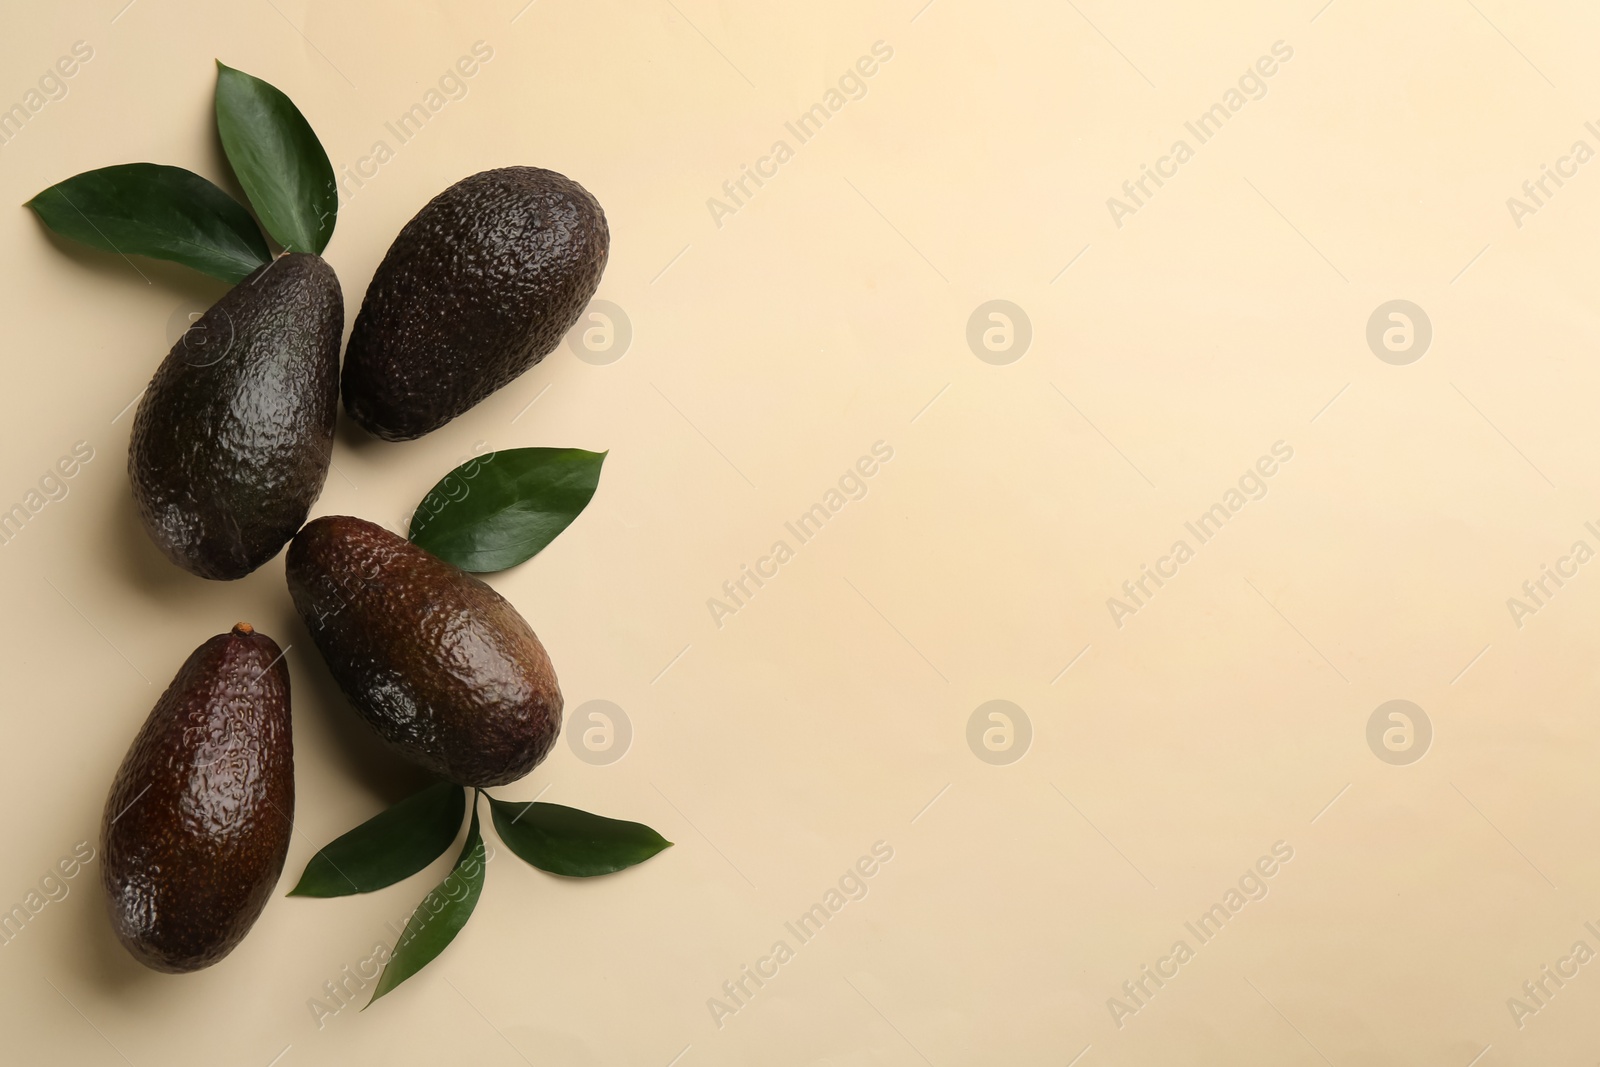 Photo of Whole ripe avocadoes and green leaves on beige background, flat lay. Space for text